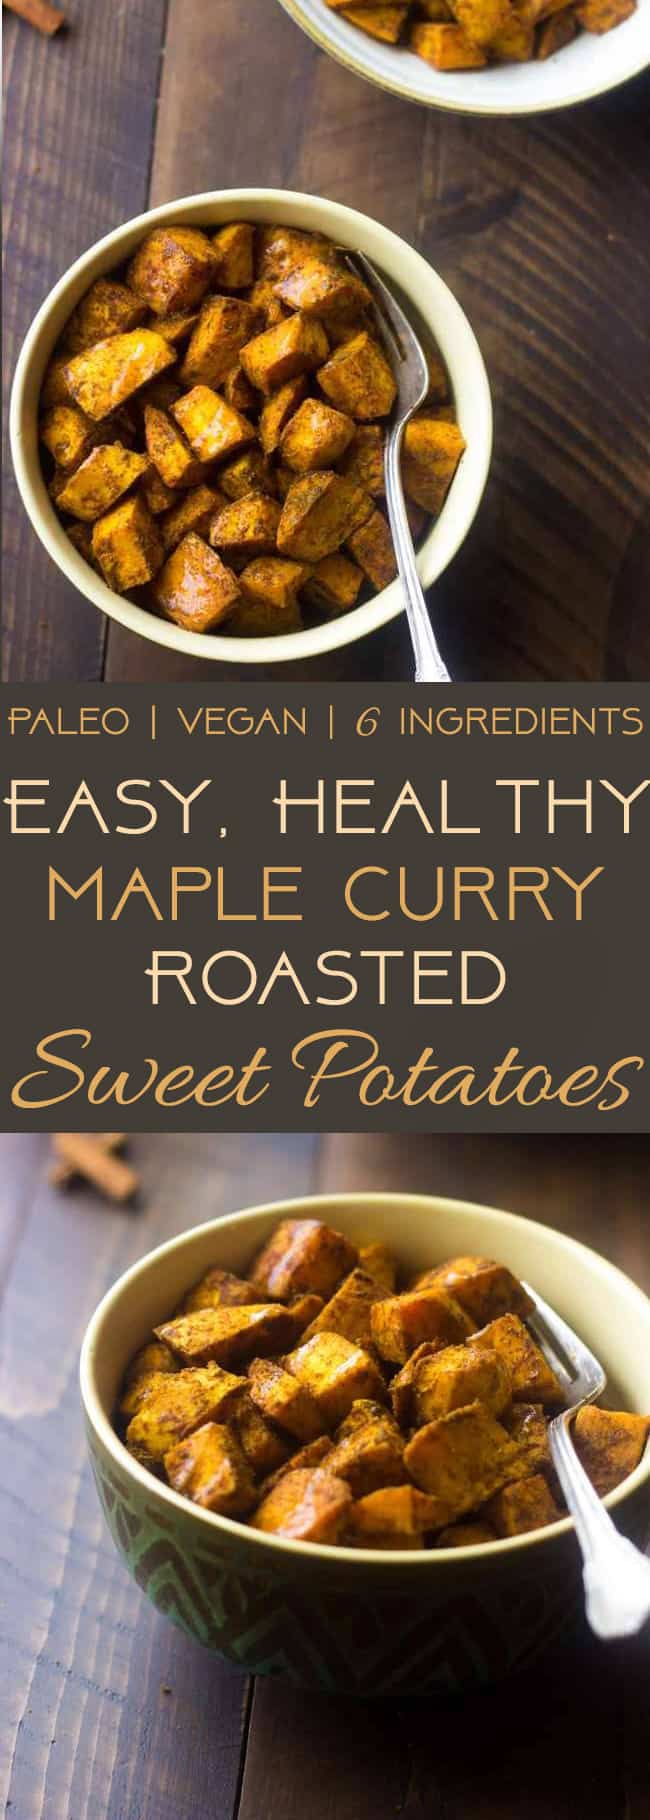 Paleo Maple Oven Roasted Sweet Potatoes in Coconut Oil - A quick and easy side dish with only 6 ingredients! Your family is going to love this healthy recipe on Thanksgiving! | Foodfaithfitness.com | @FoodFaithFit | healthy roasted sweet potatoes. easy roasted sweet potatoes. savory roasted sweet potatoes. paleo thanksgiving recipes. vegan thanksgiving recipes. healthy thanksgiving recipes. healthy thanksgiving sides. clean eating thanksgiving recipes.